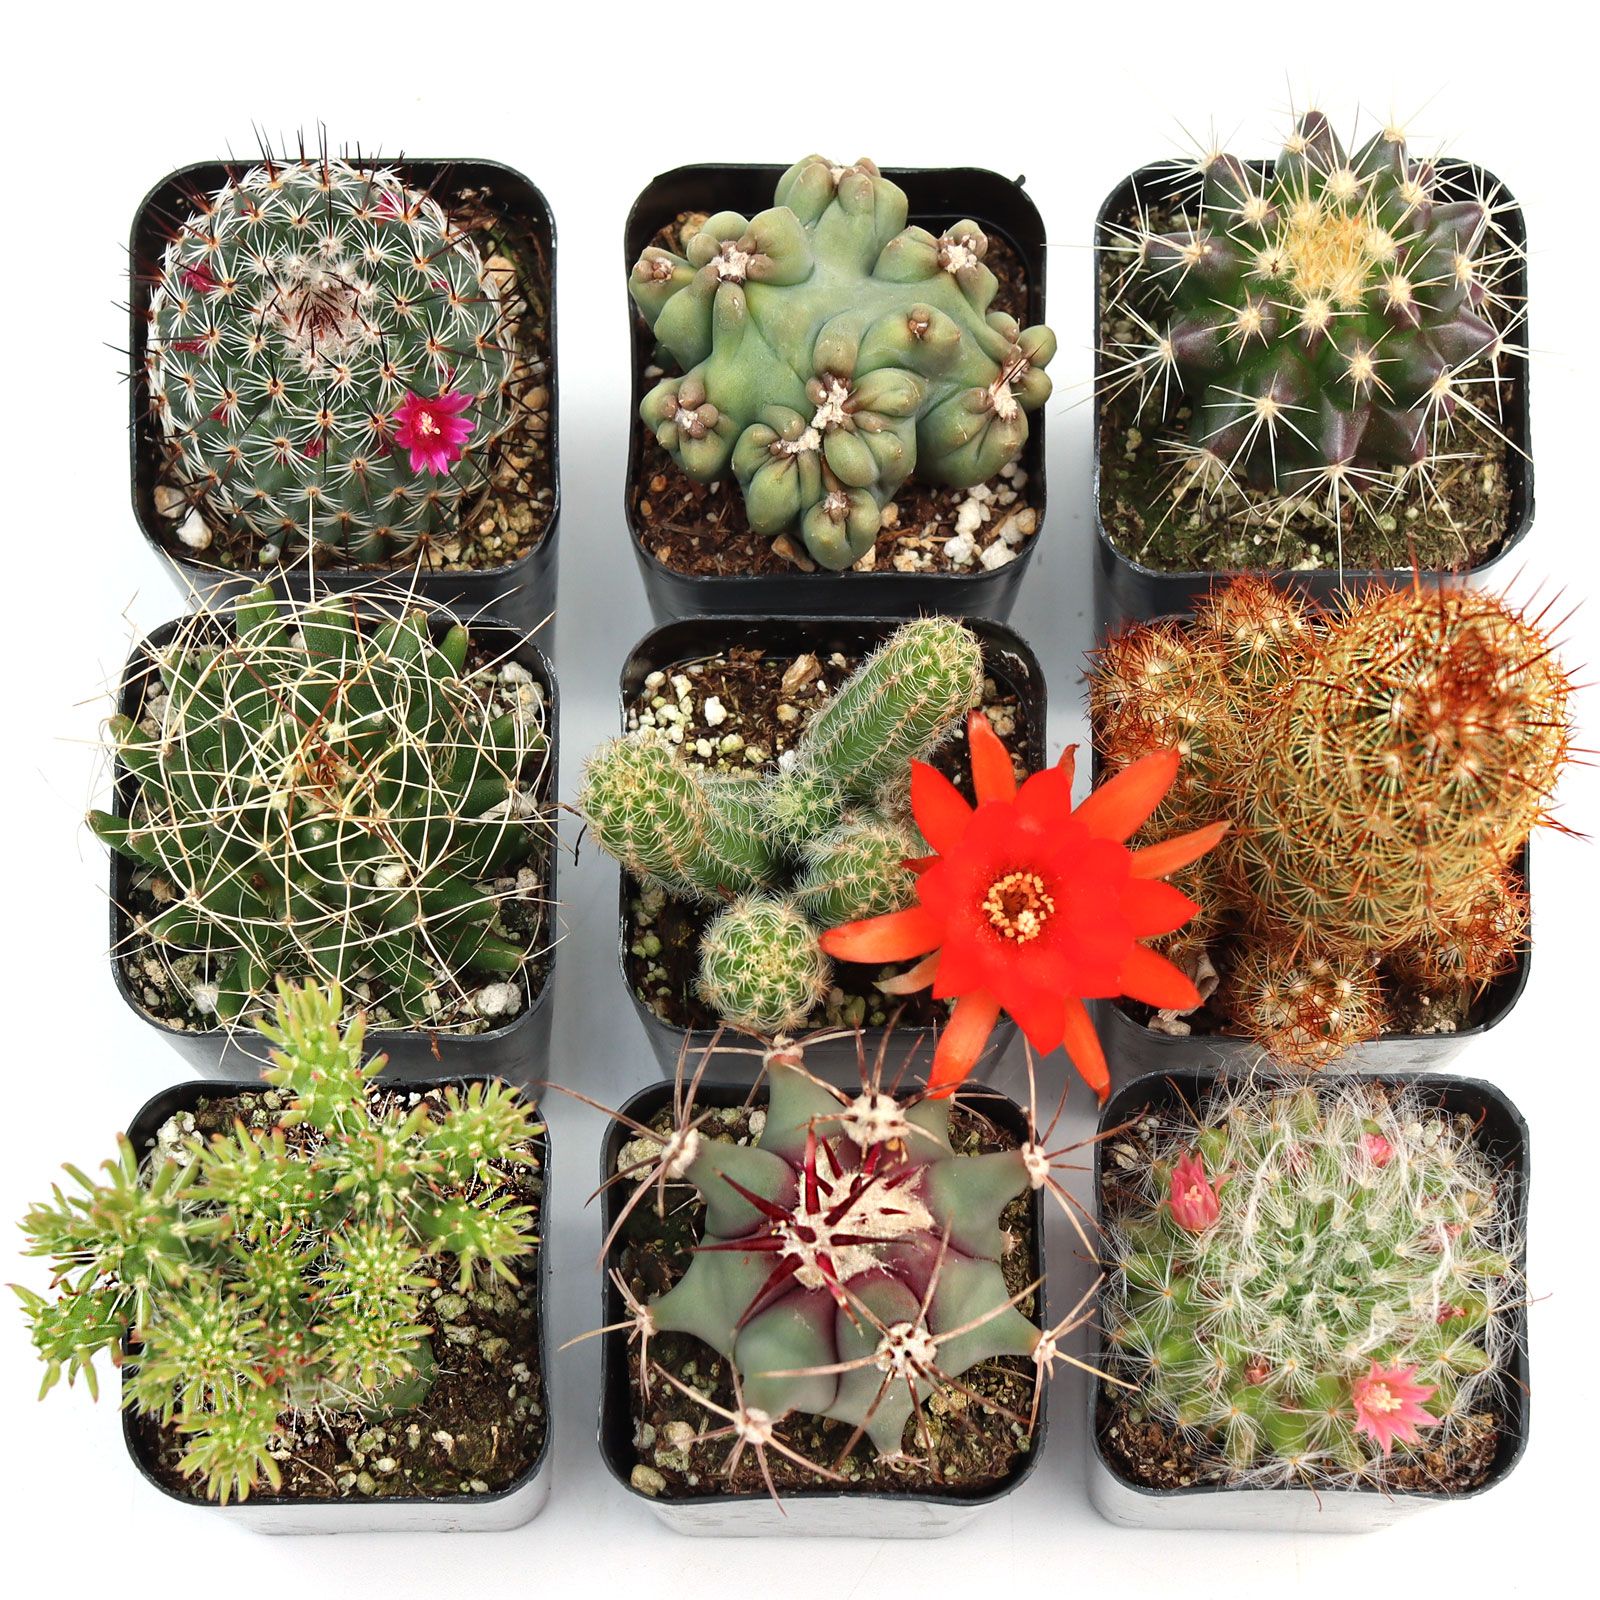 Some cacti are zone 8 friendly, could I request a cacti set that would be able to tolerate zone 8?